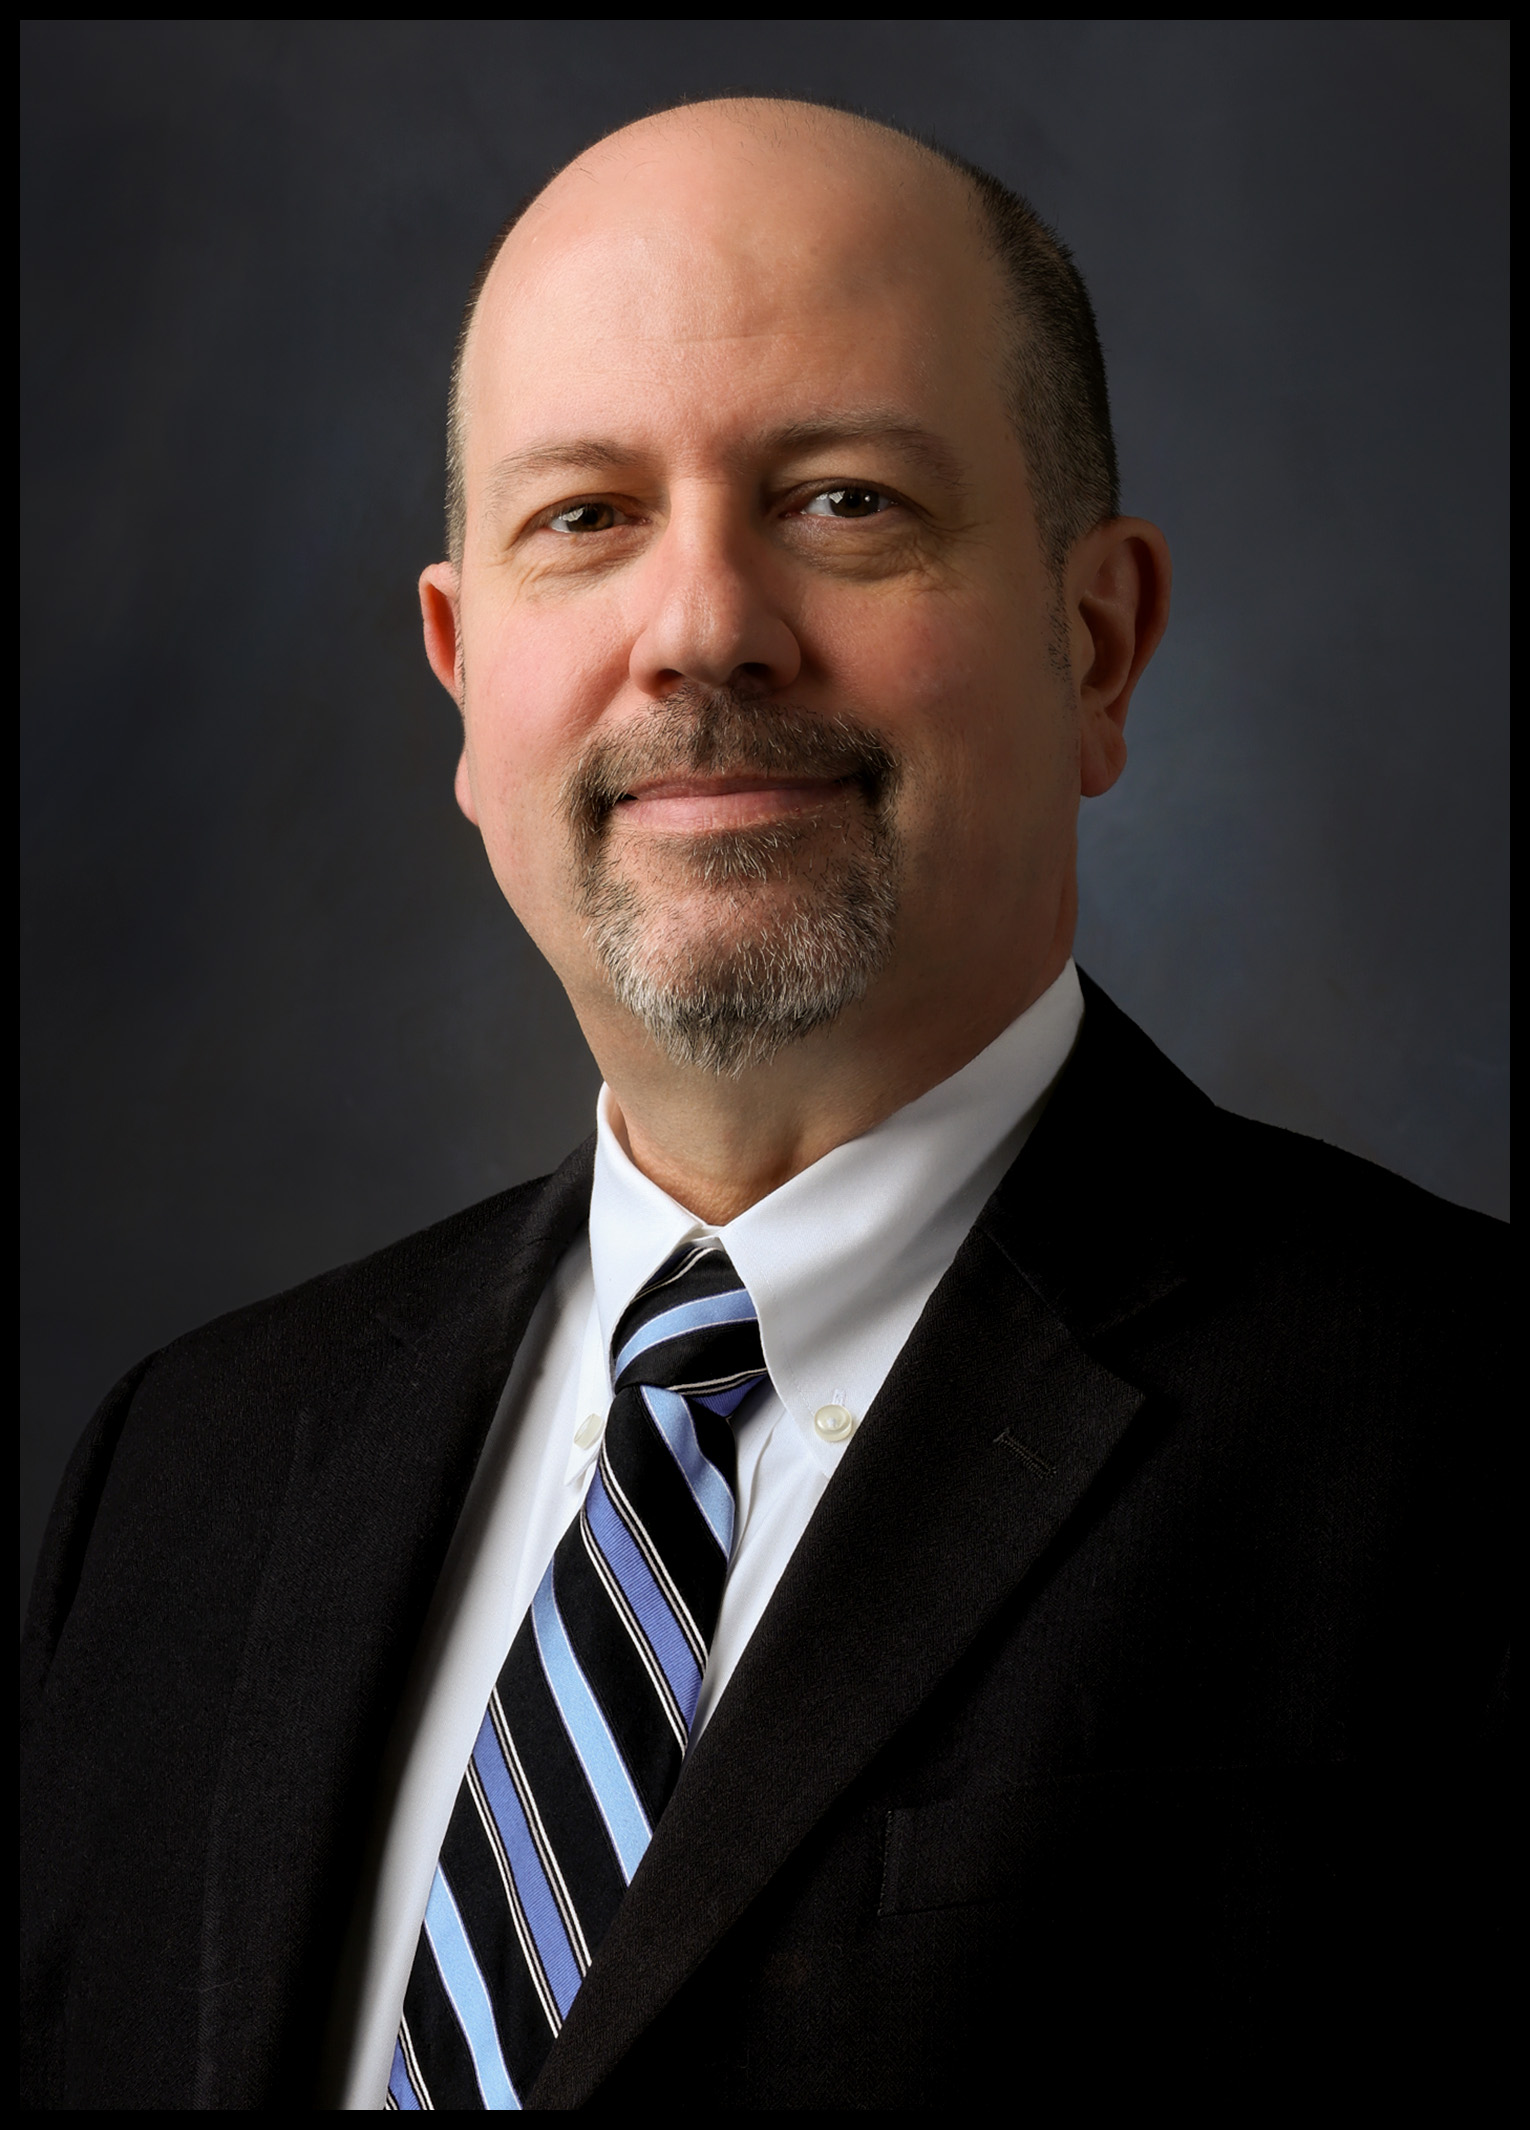 Vice President, Chief Data and Analytics Officer Stephen Dearing